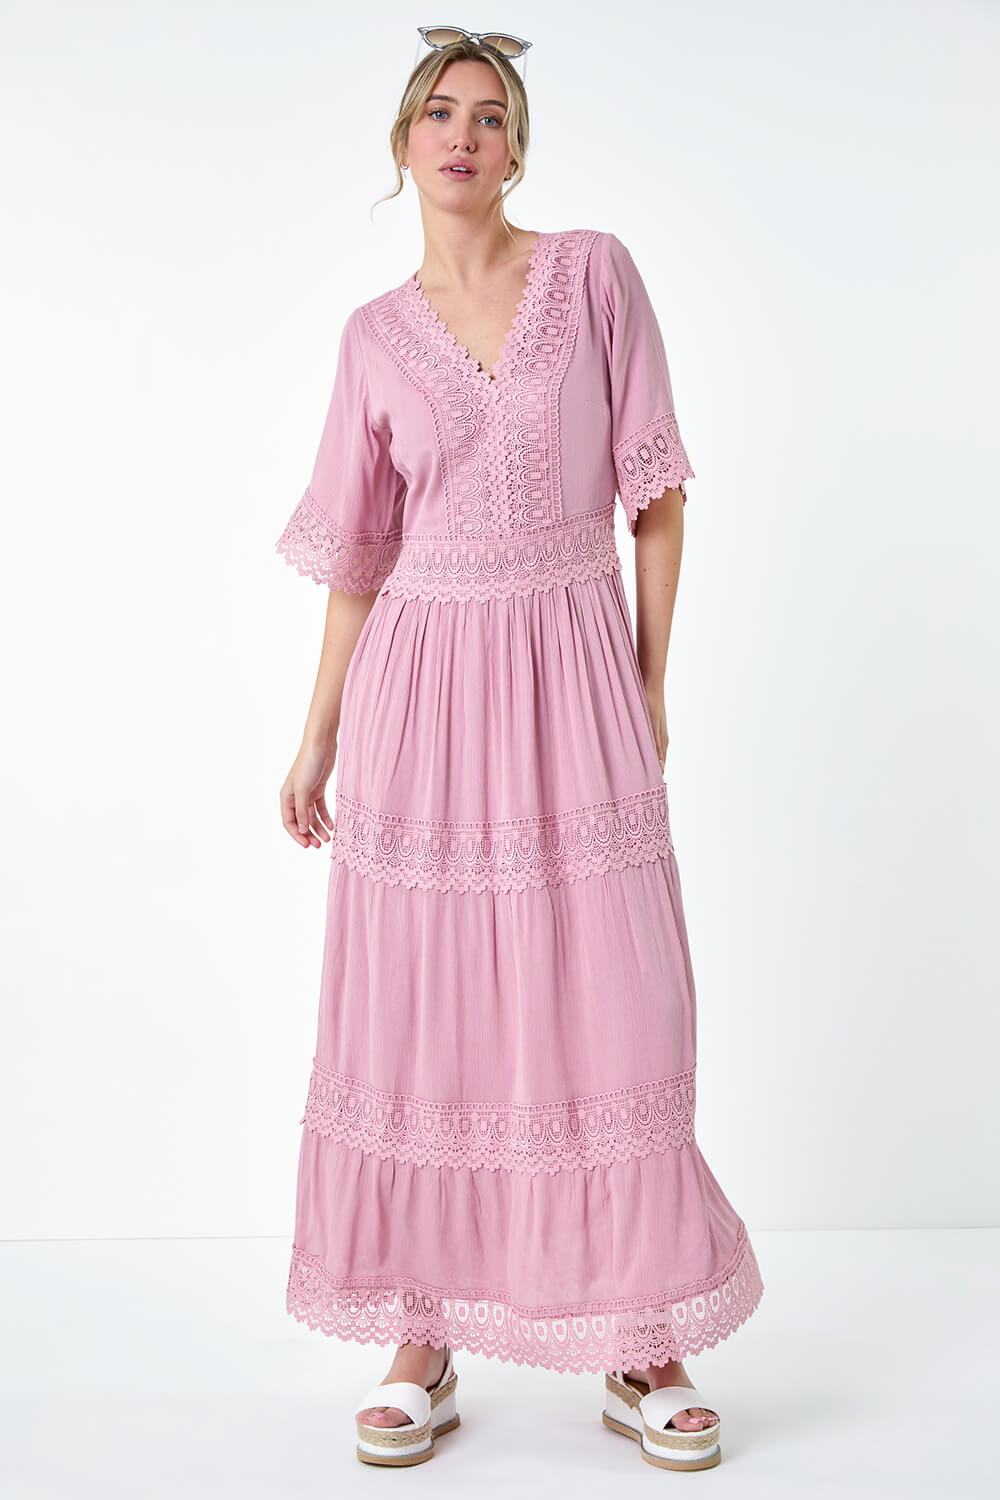 Light Pink Tiered Lace Detail Maxi Dress, Image 2 of 5